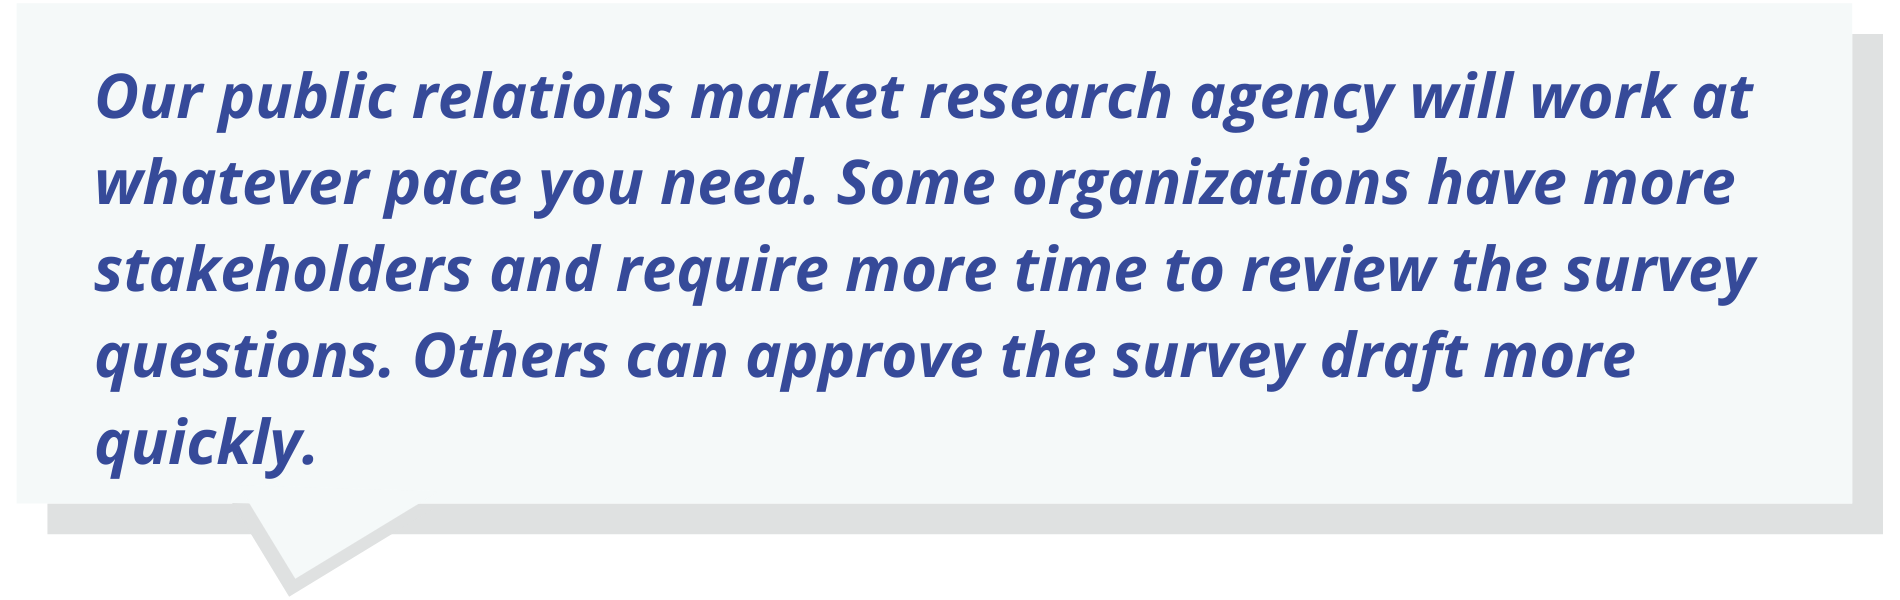 Quote Text: Our public relations market research agency will work at whatever pace you need.  Some organizations have more stakeholders and require more time to review the survey questions.  Others can approve the survey draft more quickly.